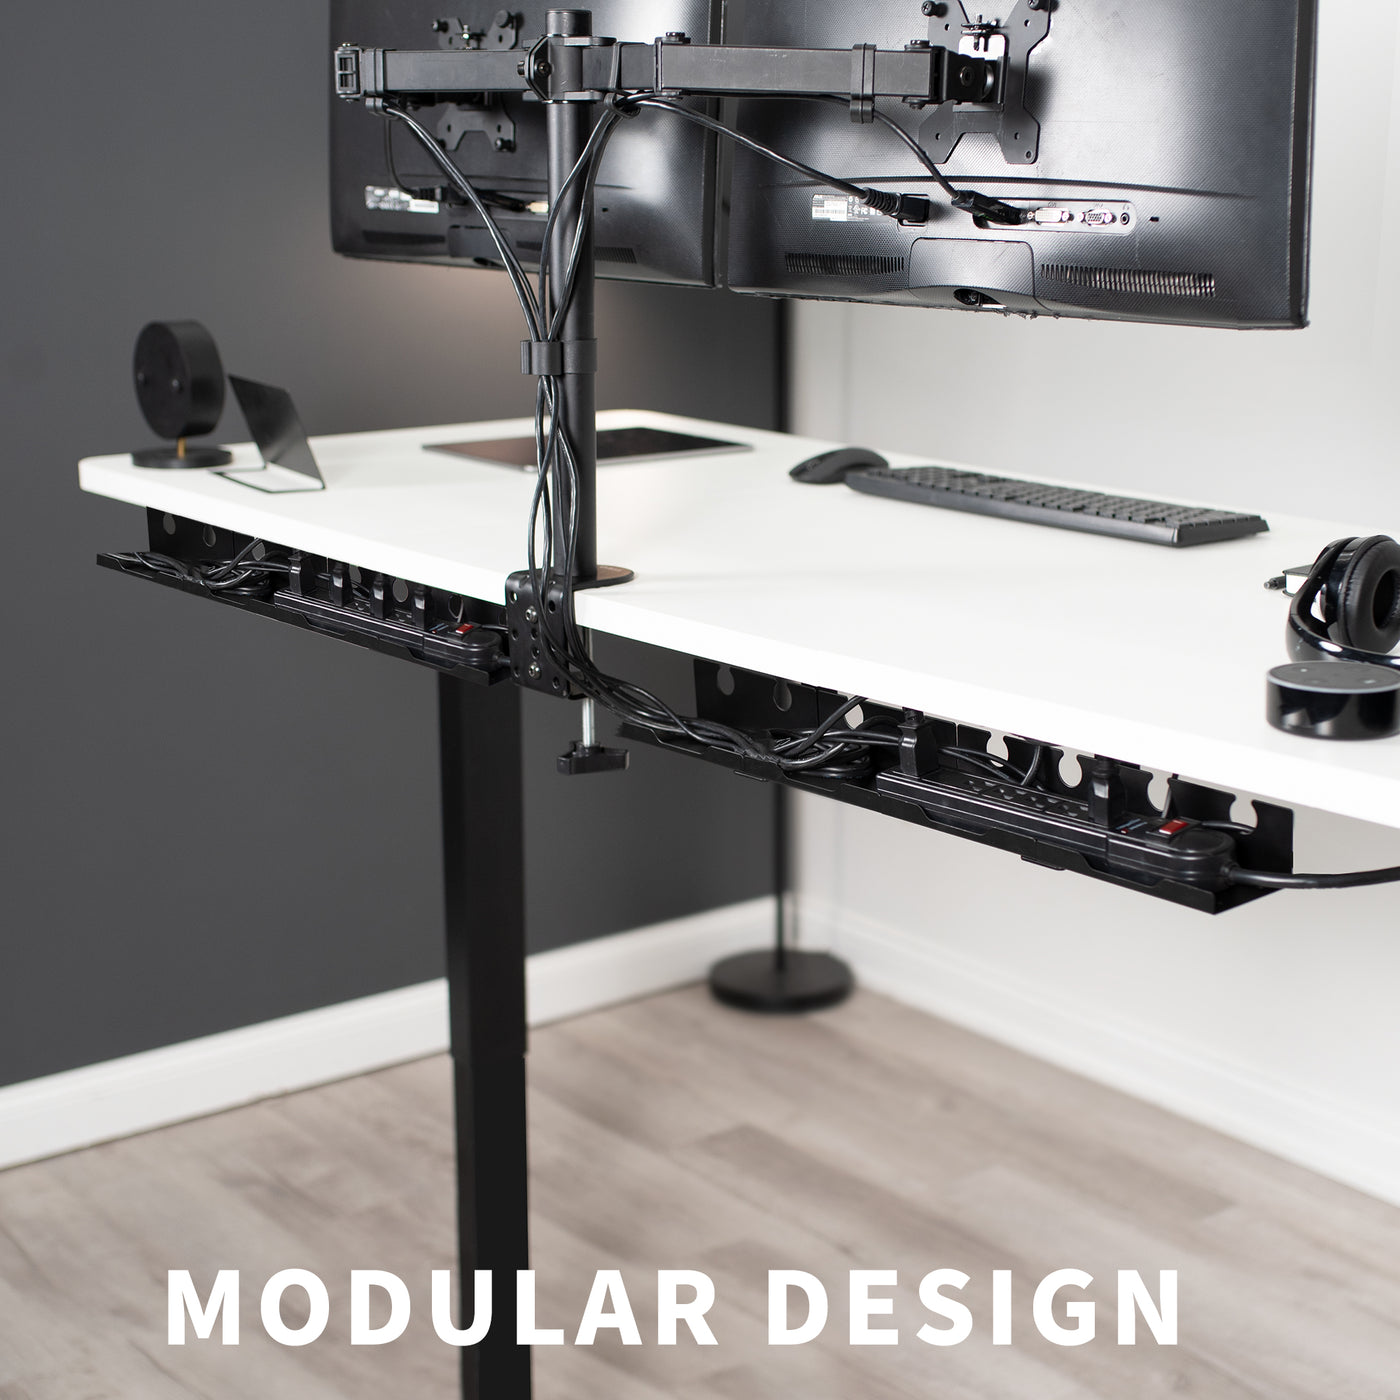 Modular cable management design of two under-desk cable management trays splitting cords and power strips.